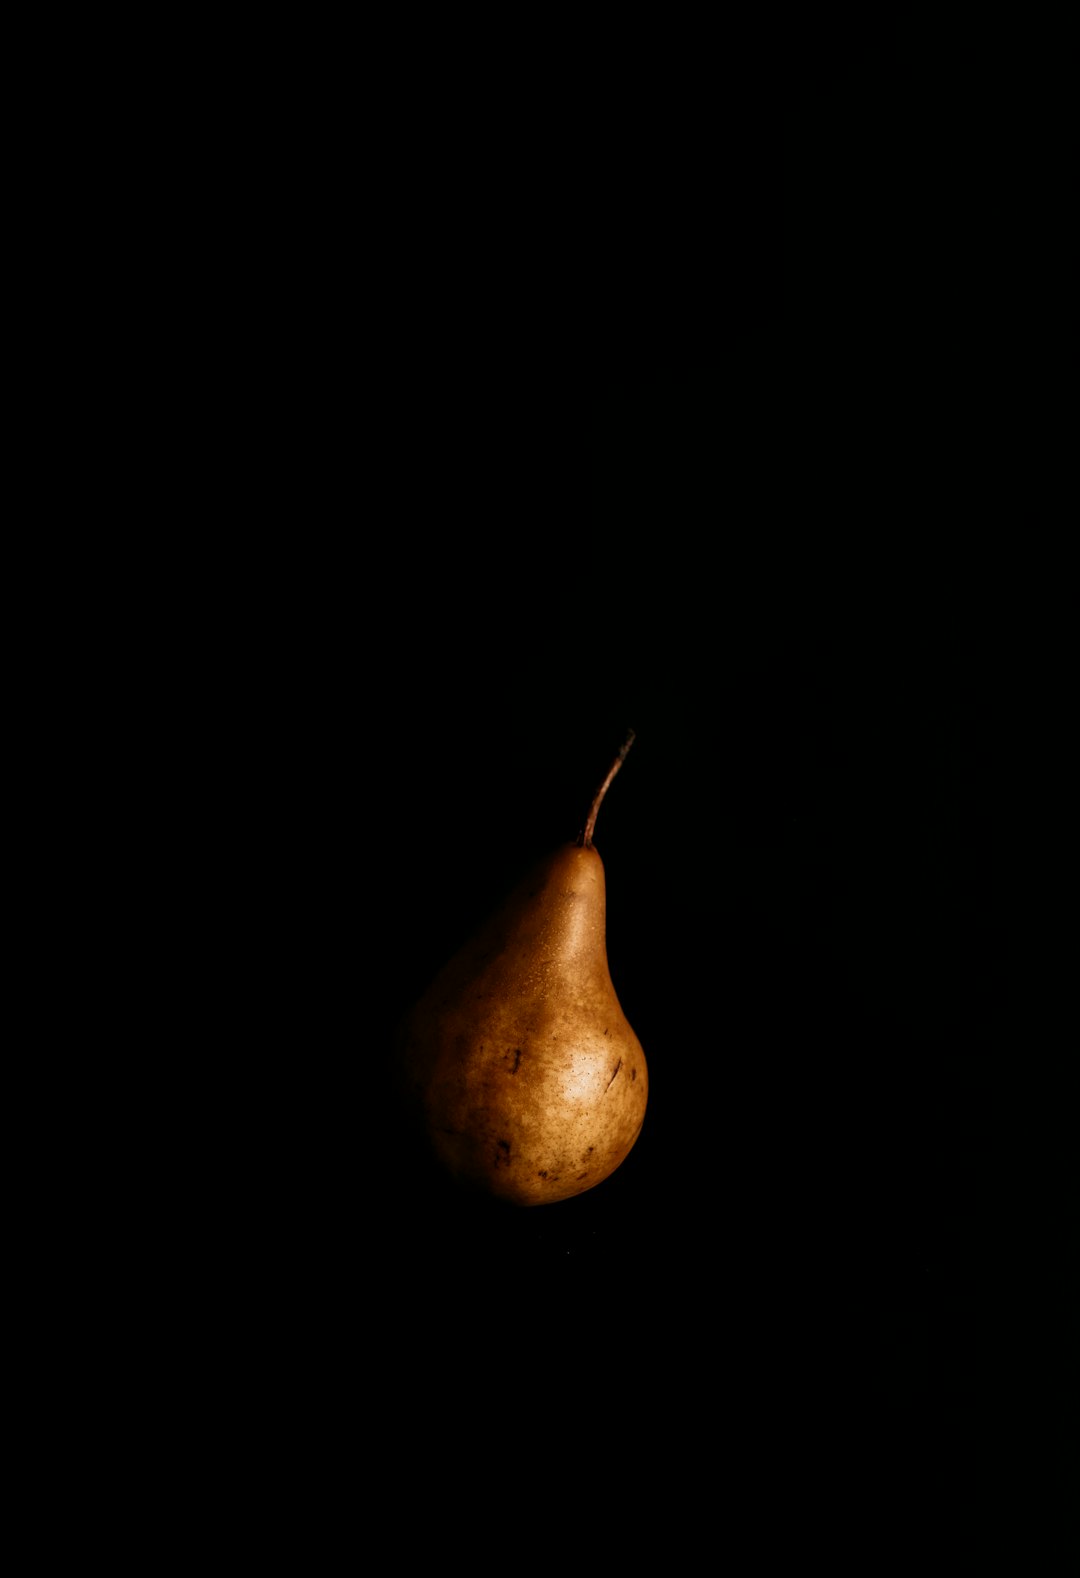 brown and beige fruit with black background